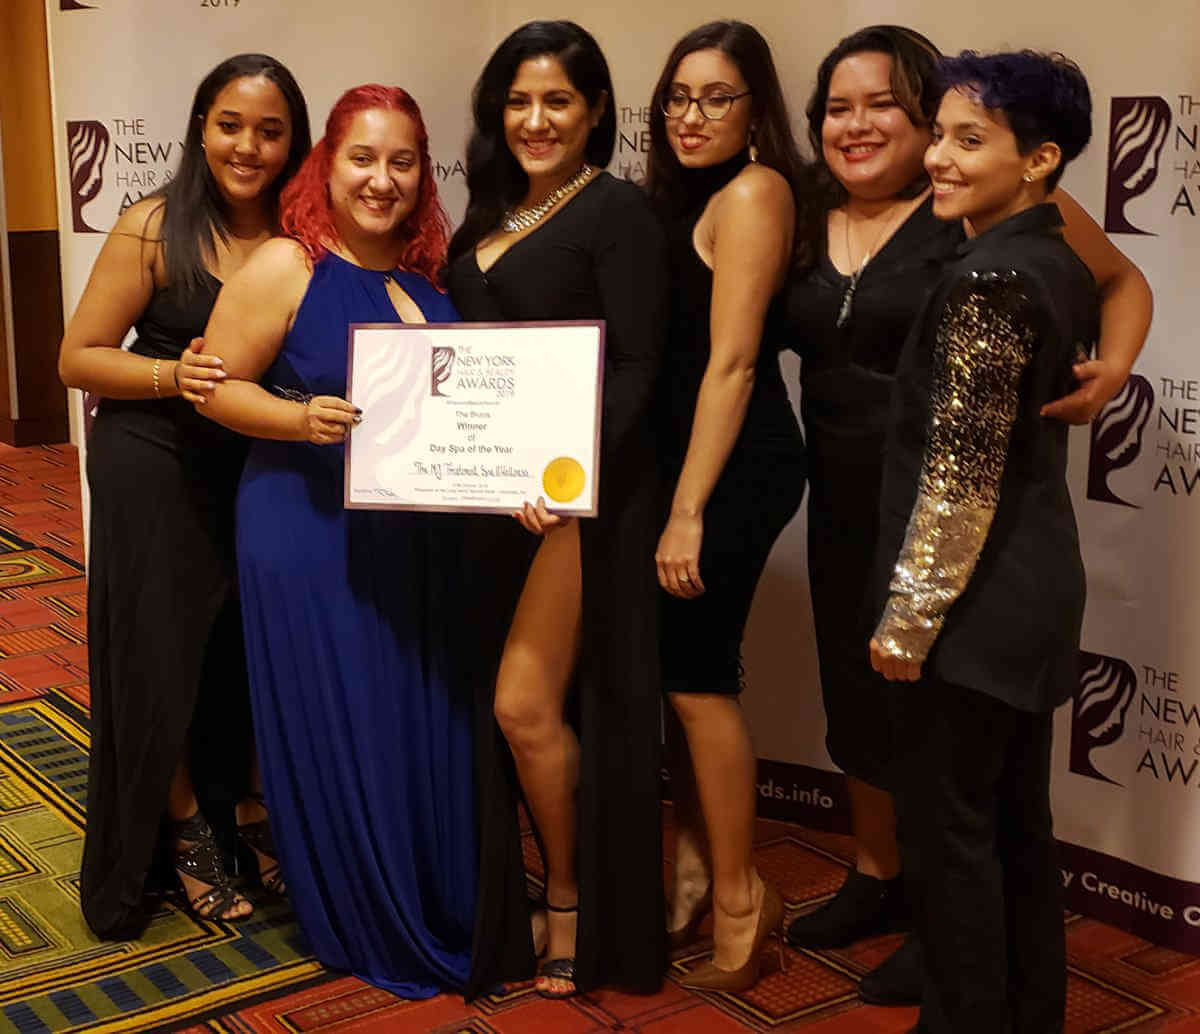 ‘Day Spa of the Year’ award given to MJ Treatment Spa & Wellness